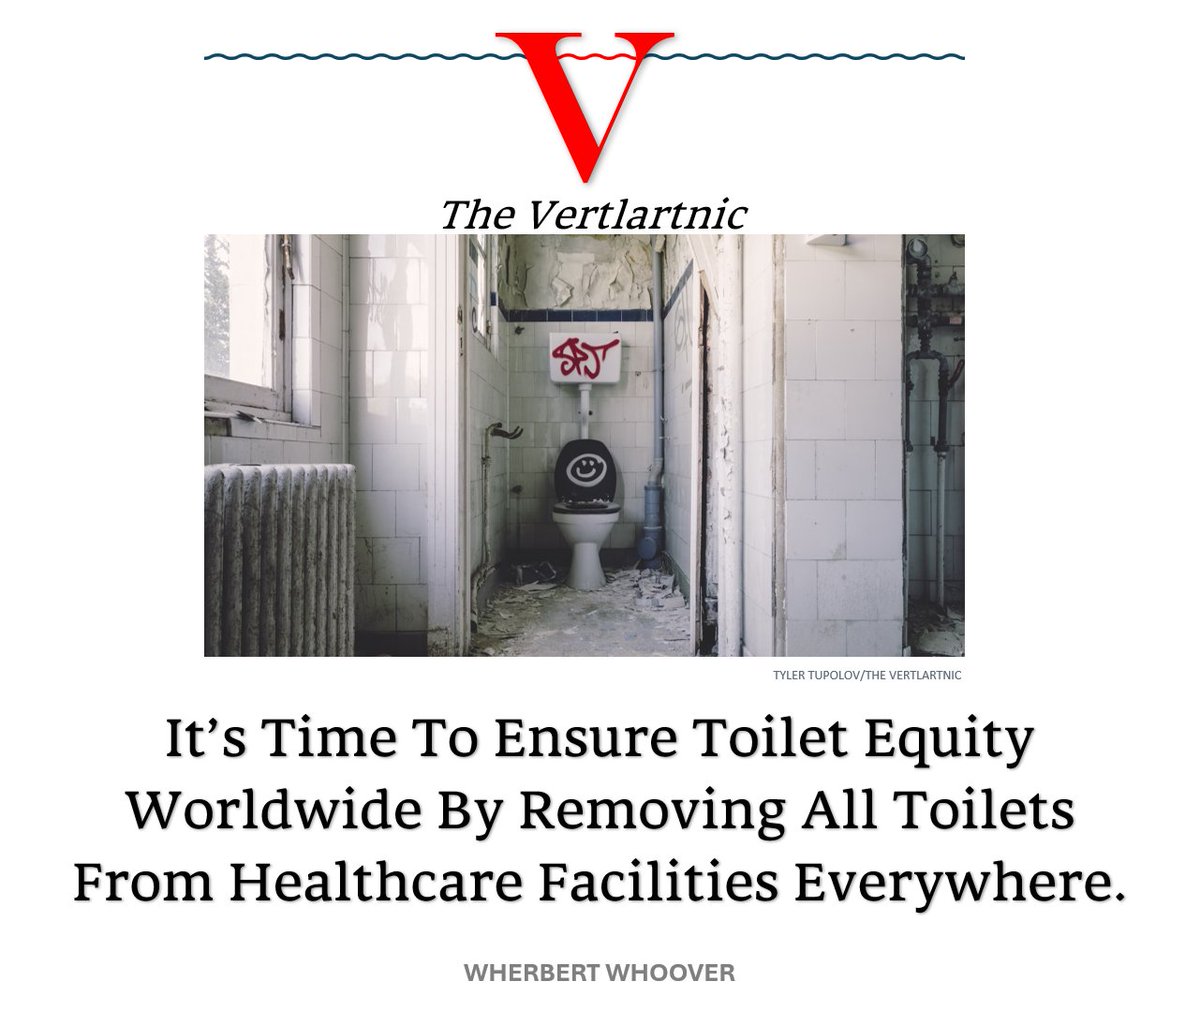 It’s Time To Ensure Toilet Equity Worldwide By Removing All Toilets From Healthcare Facilities Everywhere.